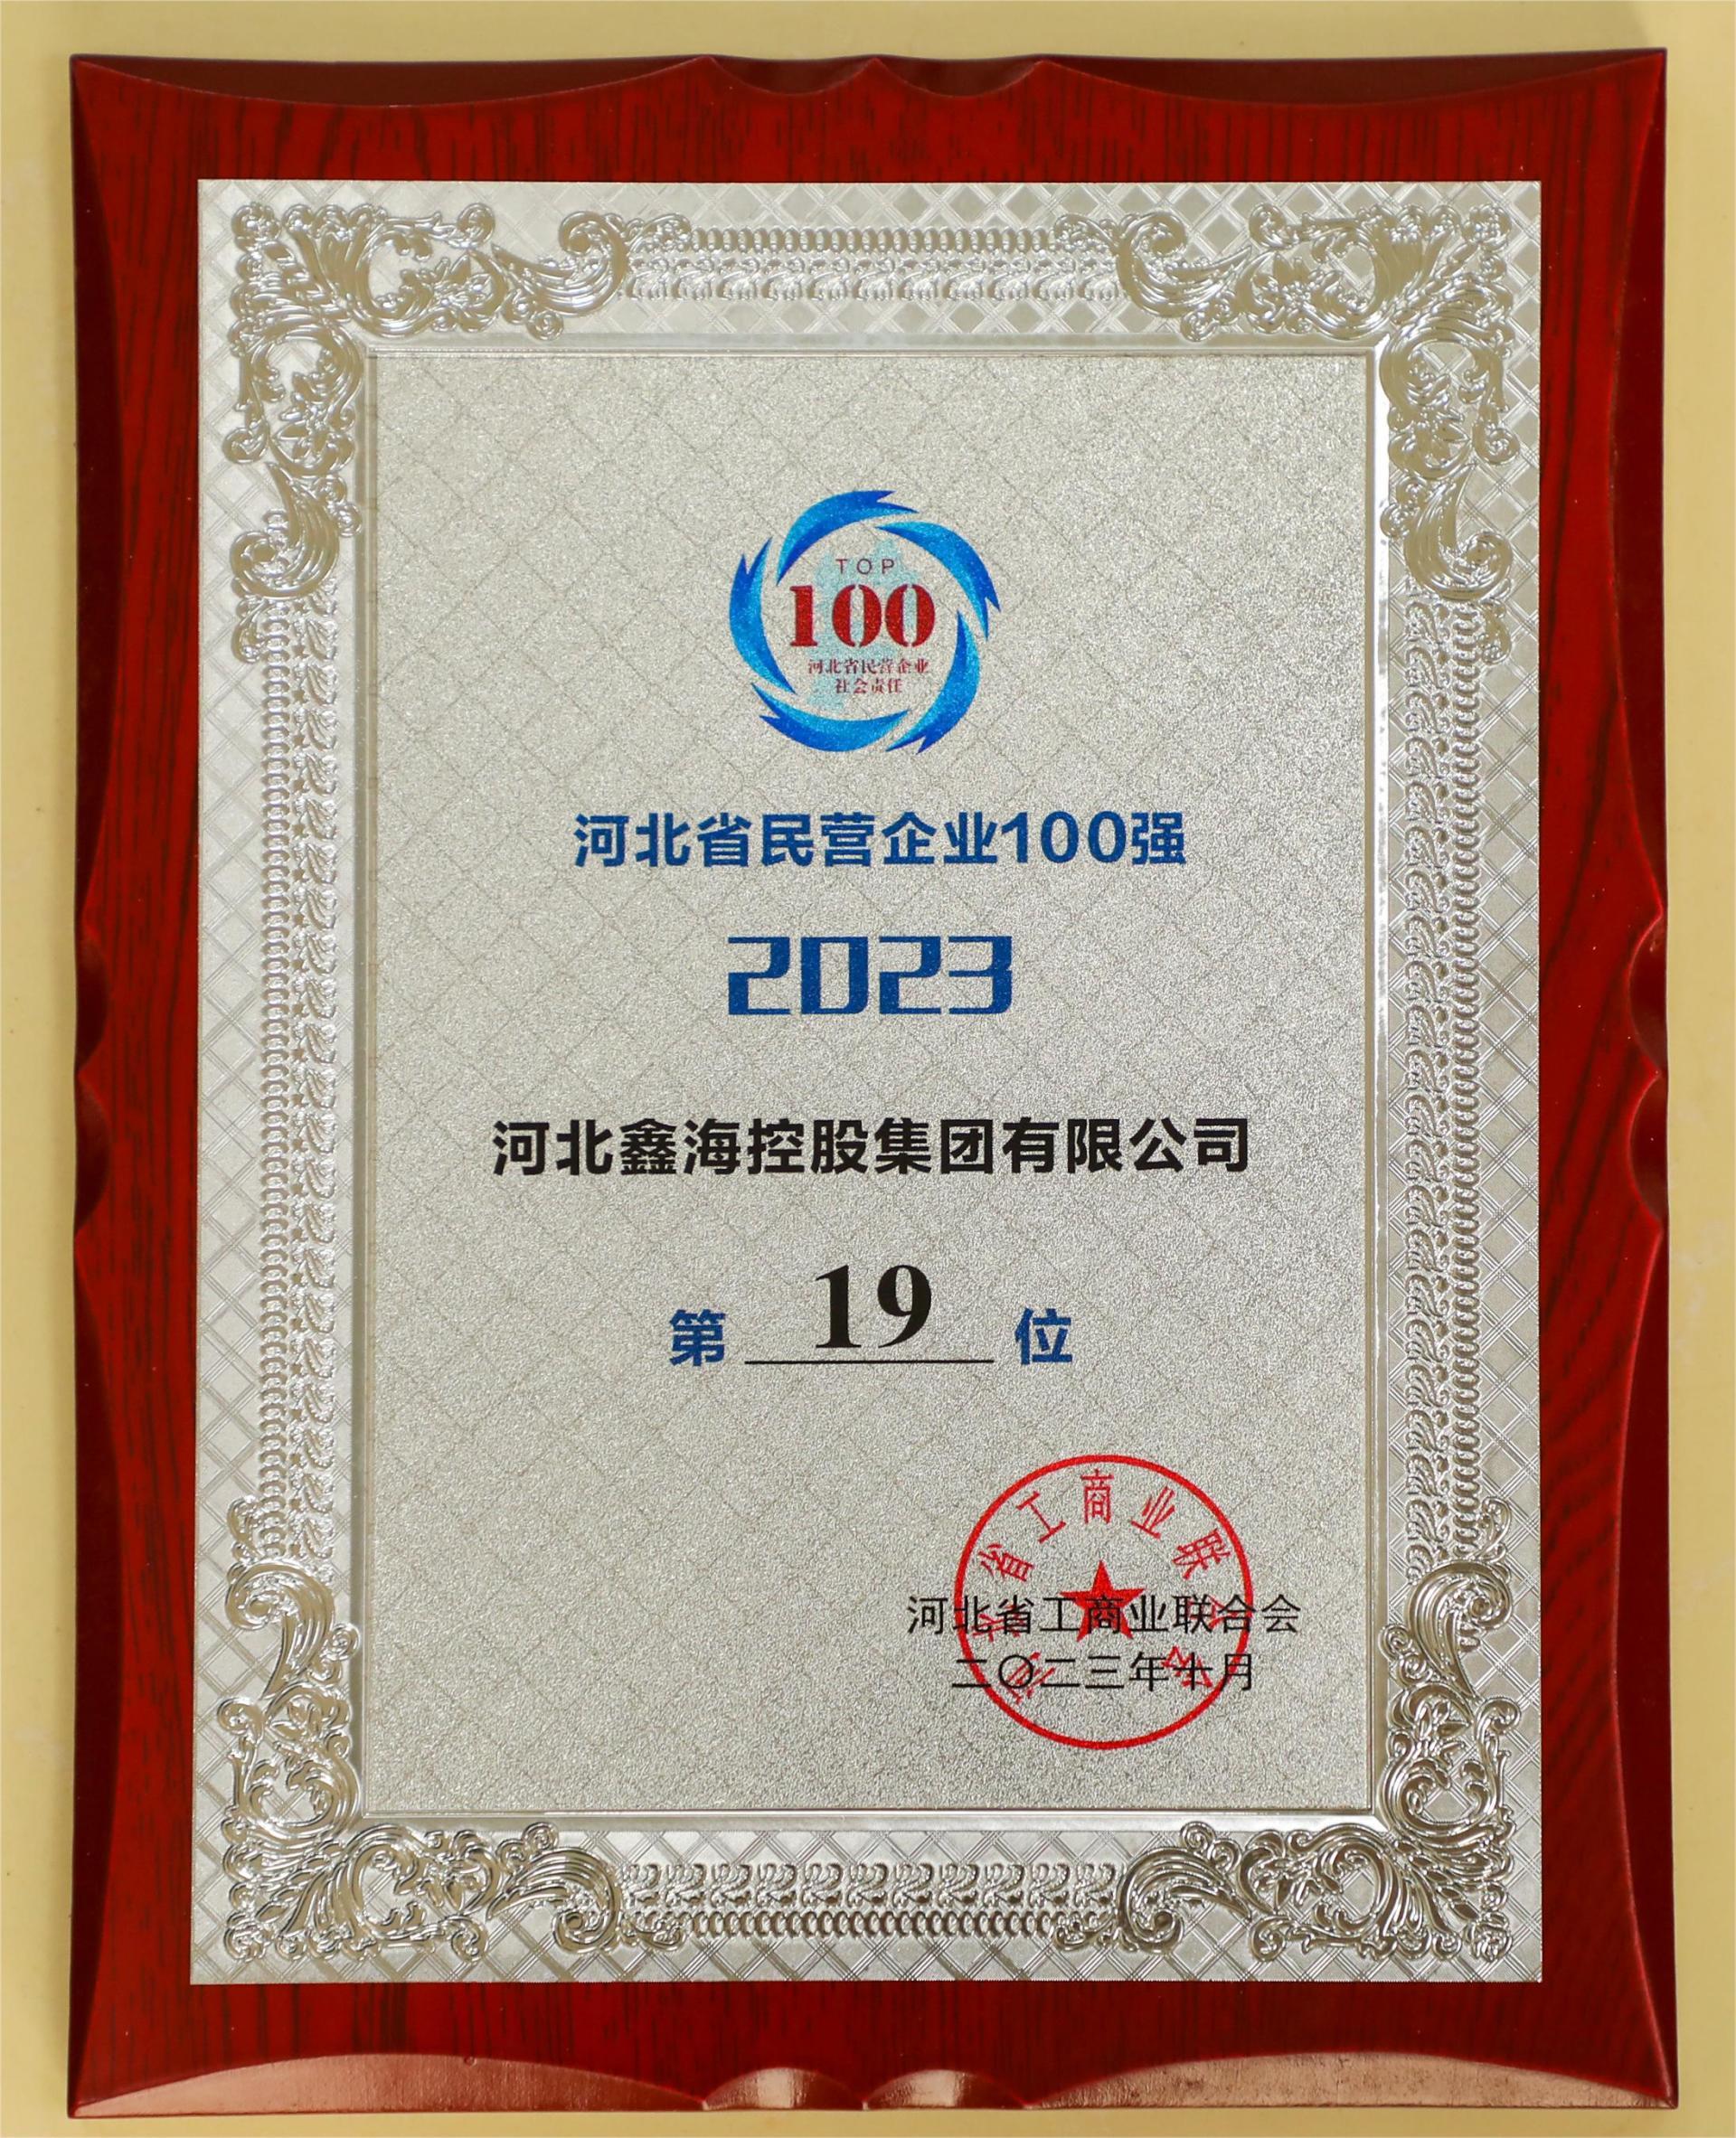 Xinhai Holding Group has been listed in the list of top 100 private enterprises and top 100 manufacturing private enterprises in Hebei Province in 2023.